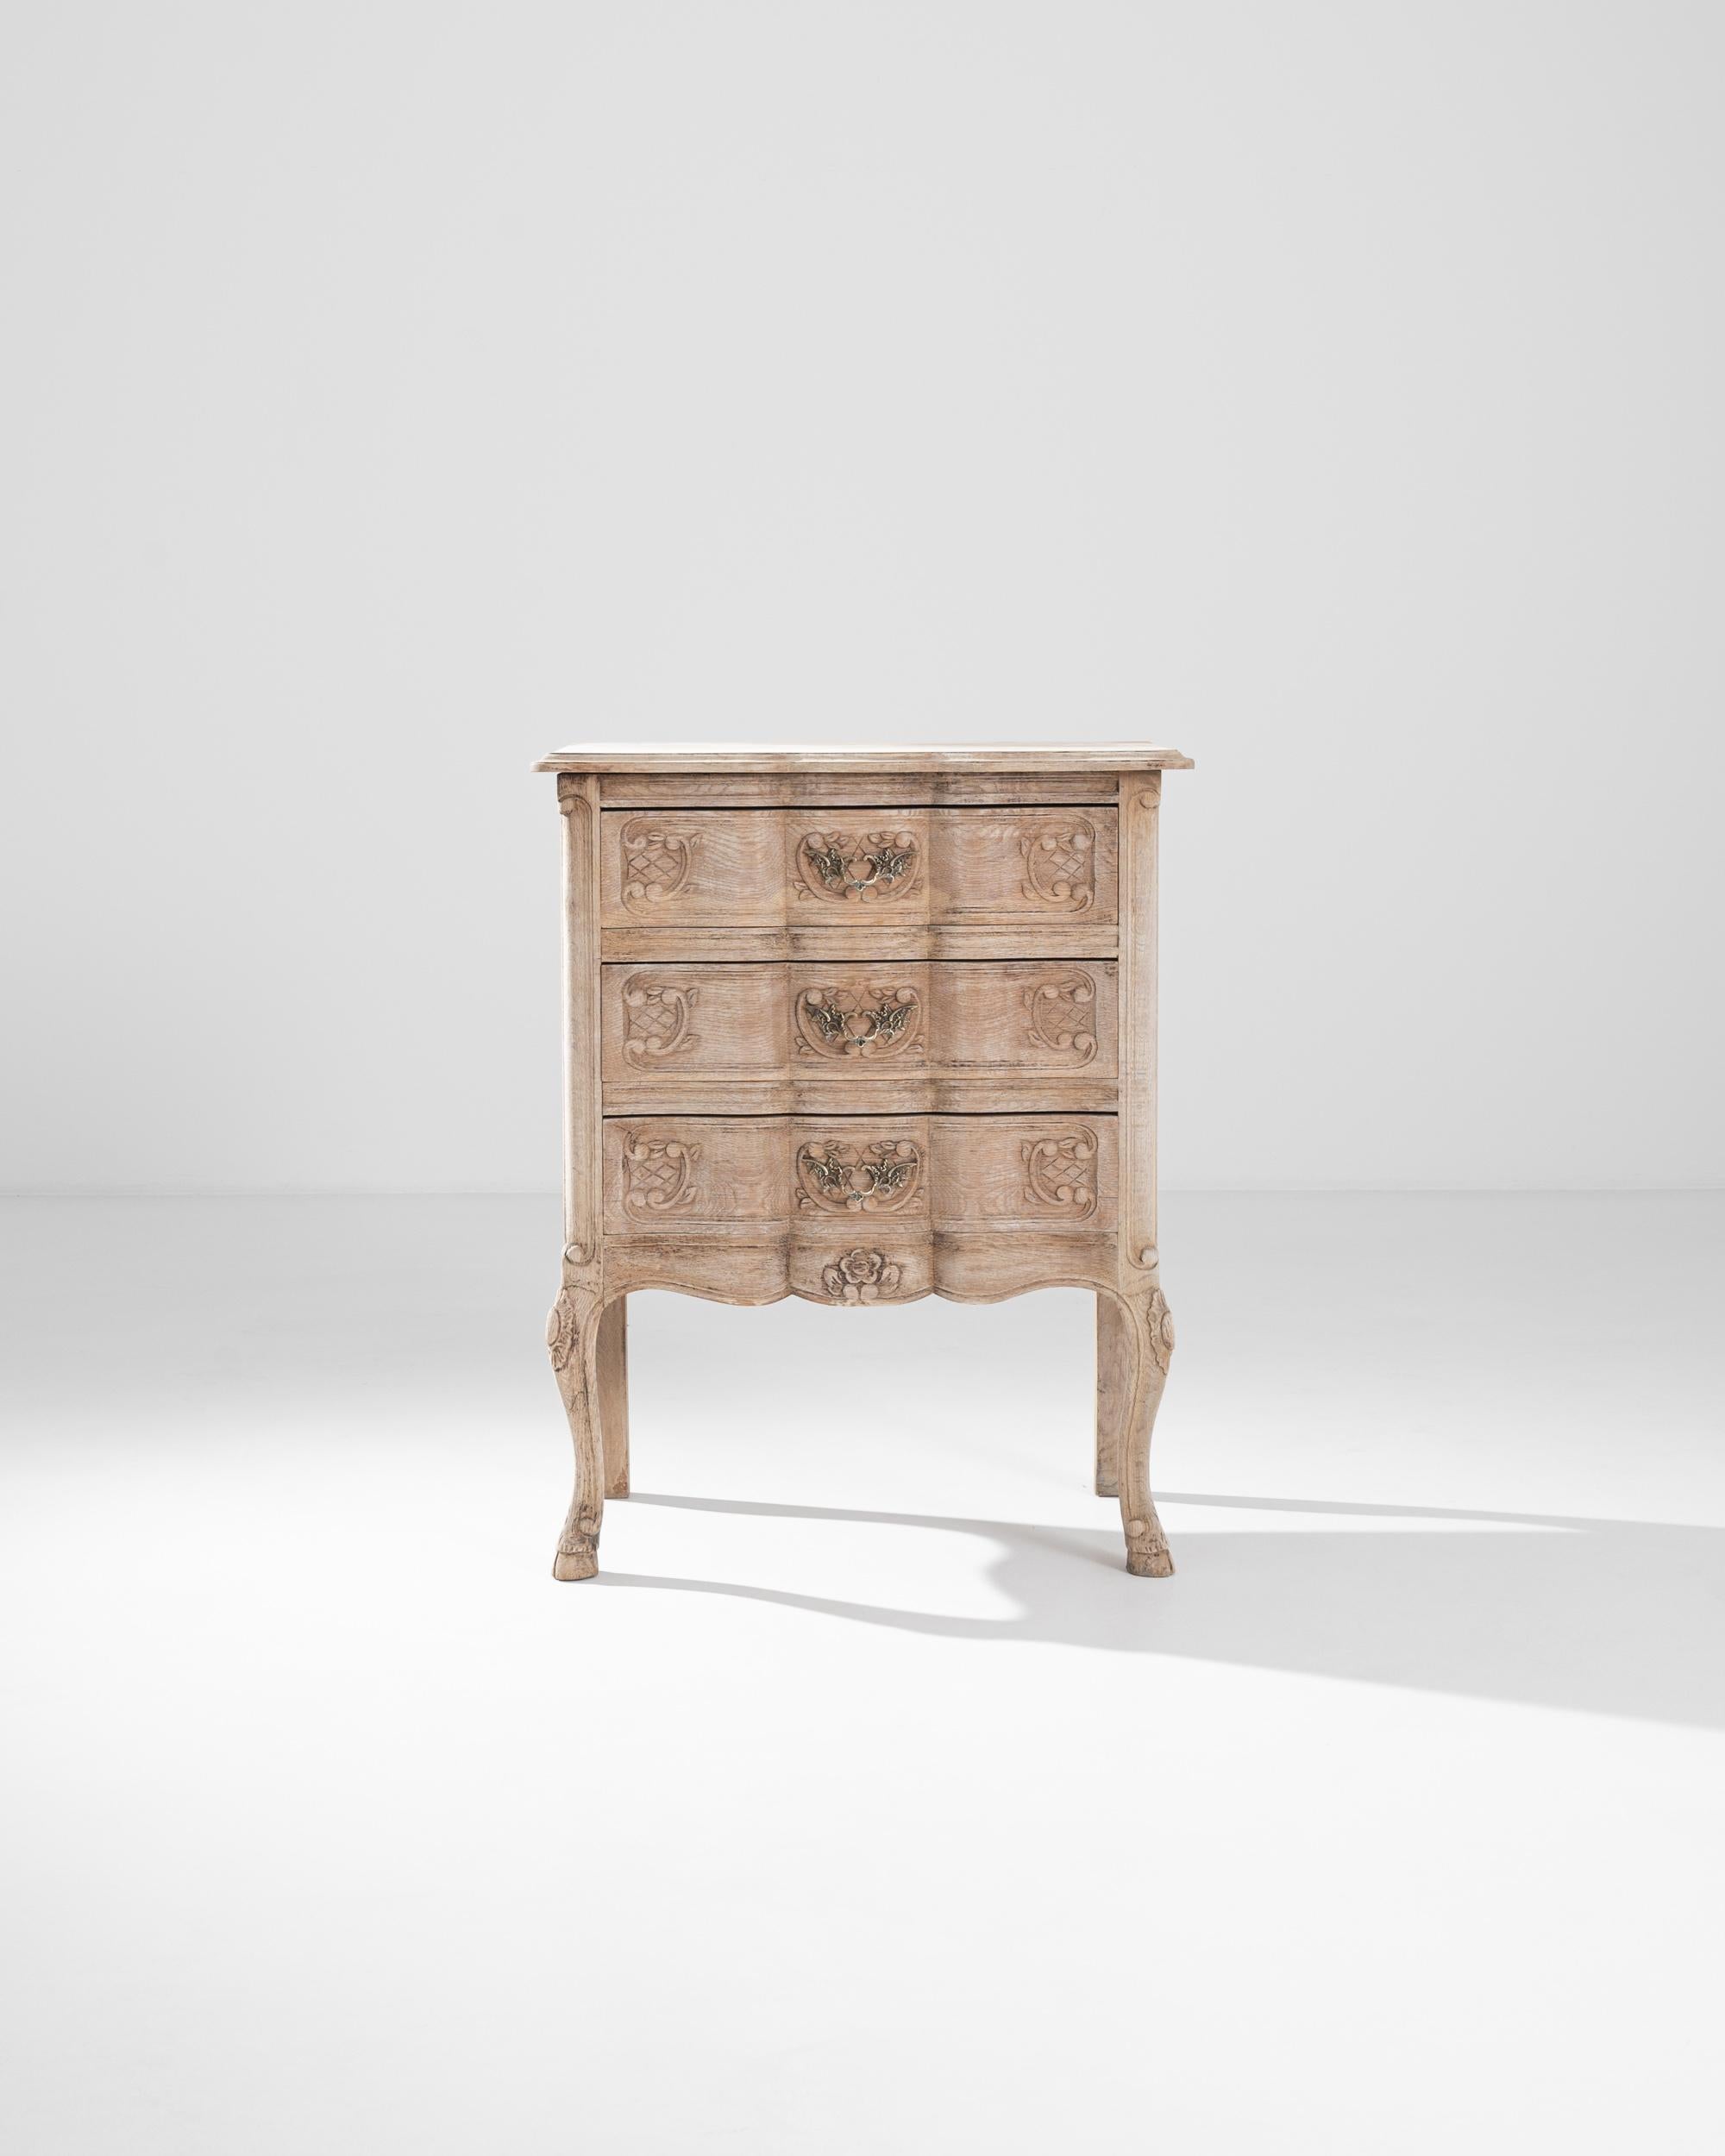 With a convenient small forn, this bleached oak chest of drawers made in France in the 20th century. Three top-down drawers are flanked by animated curved legs, giving a handsome shape to this set of drawers. Scroll and floral motifs combine with